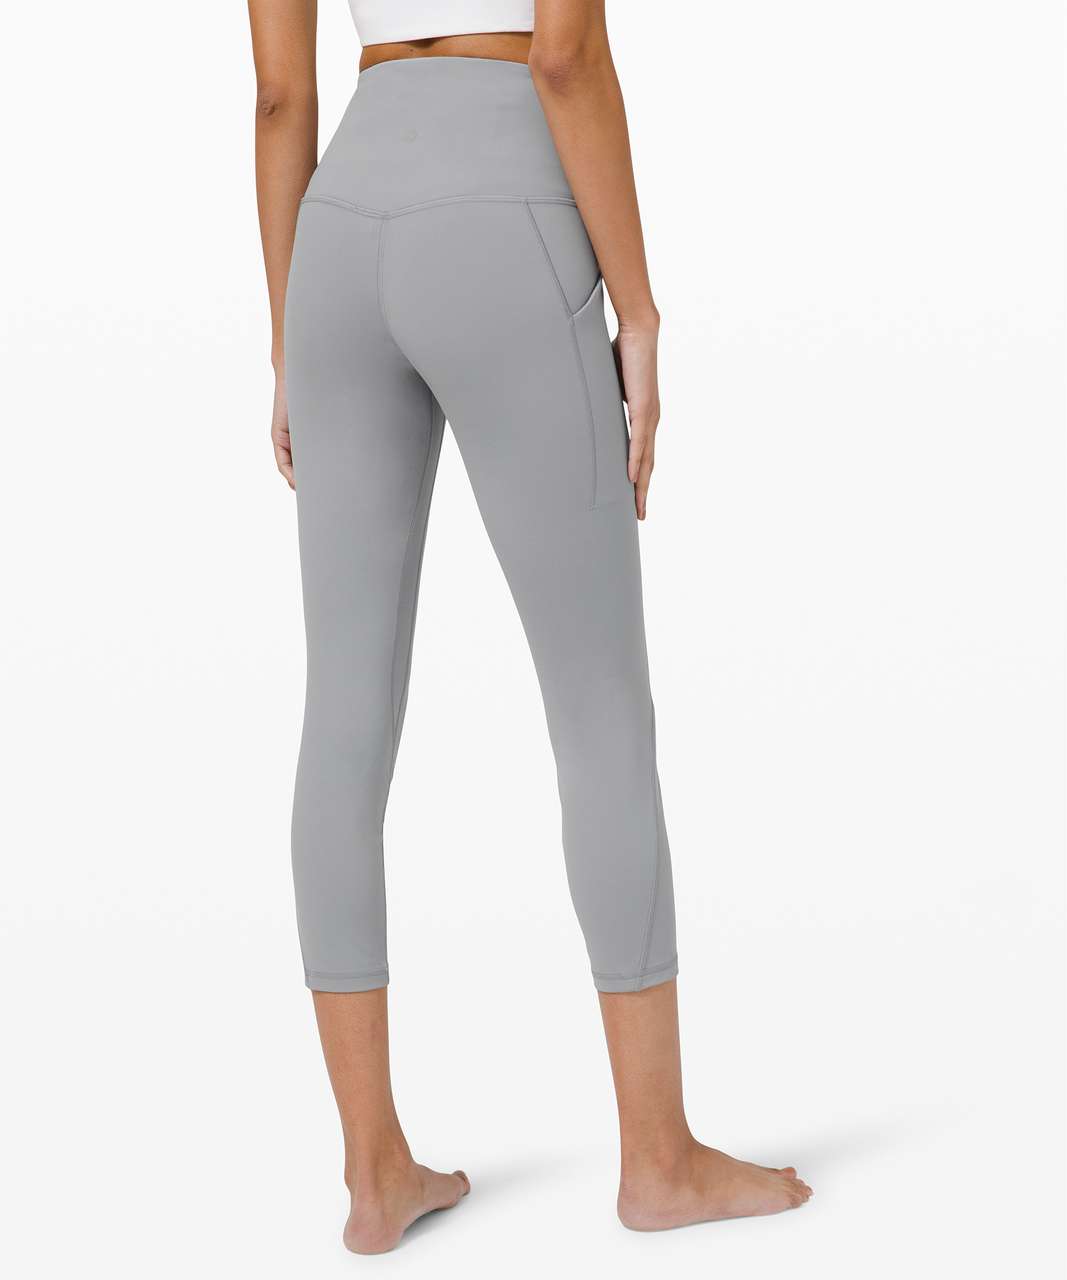 Lululemon Align High Rise Crop with Pockets 23 in Grey Sage size 14